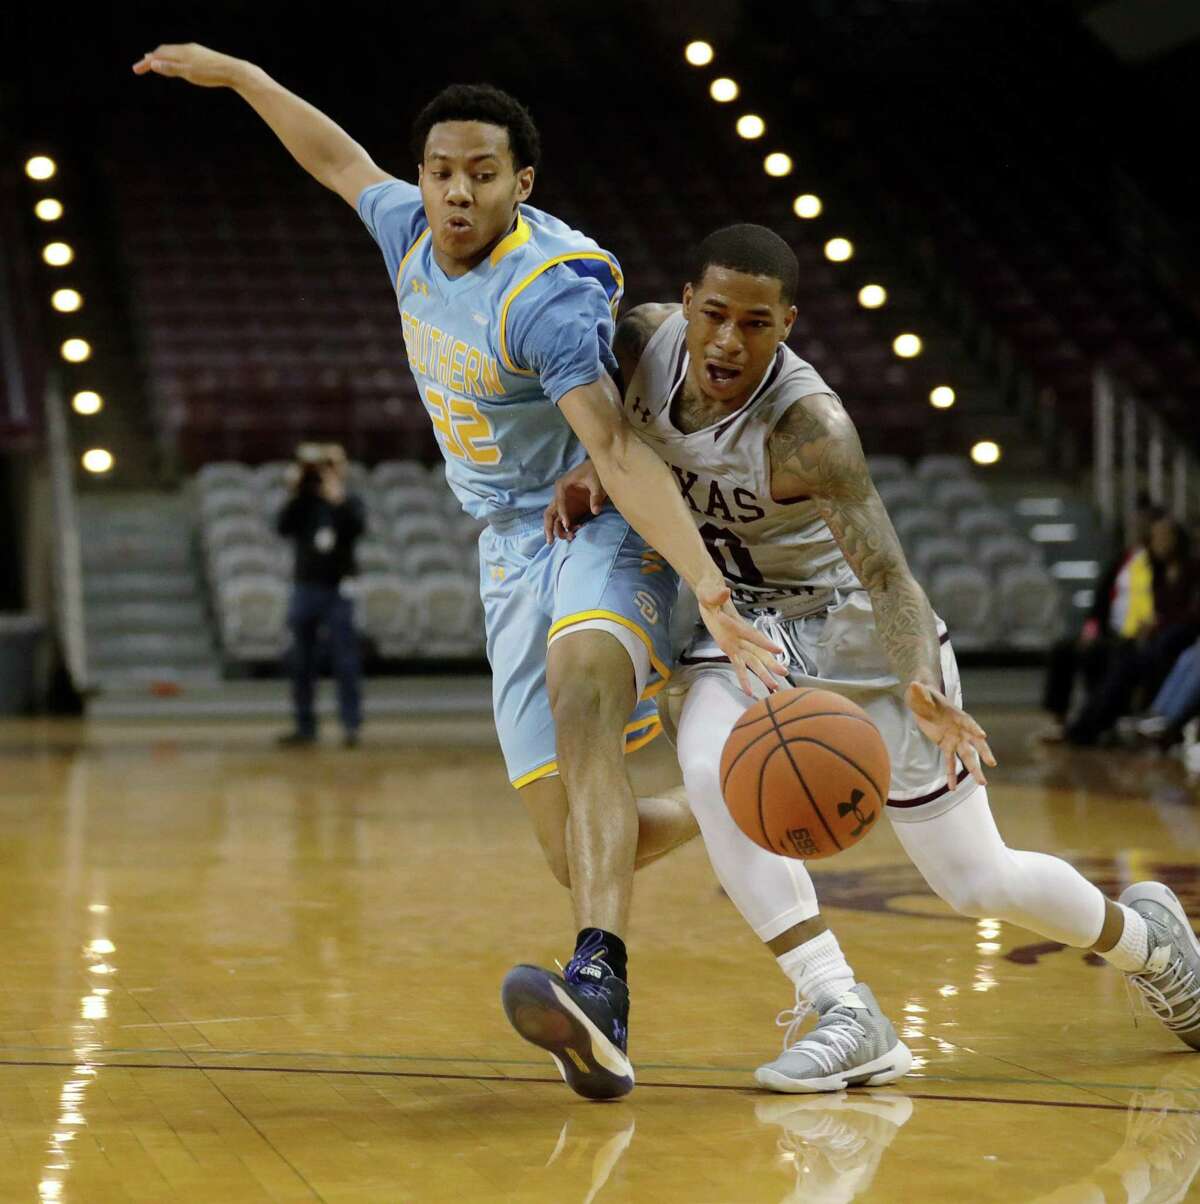 Southern University Jaguars guard Jayden Saddler (32) guards Texas Southern Tigers guard Tyrik Armstrong (20) while he drives to the basket during the second half of a SWAC tournament quarterfinal game at TSU's HPE Arena, Tuesday, March 12, 2019, in Houston.